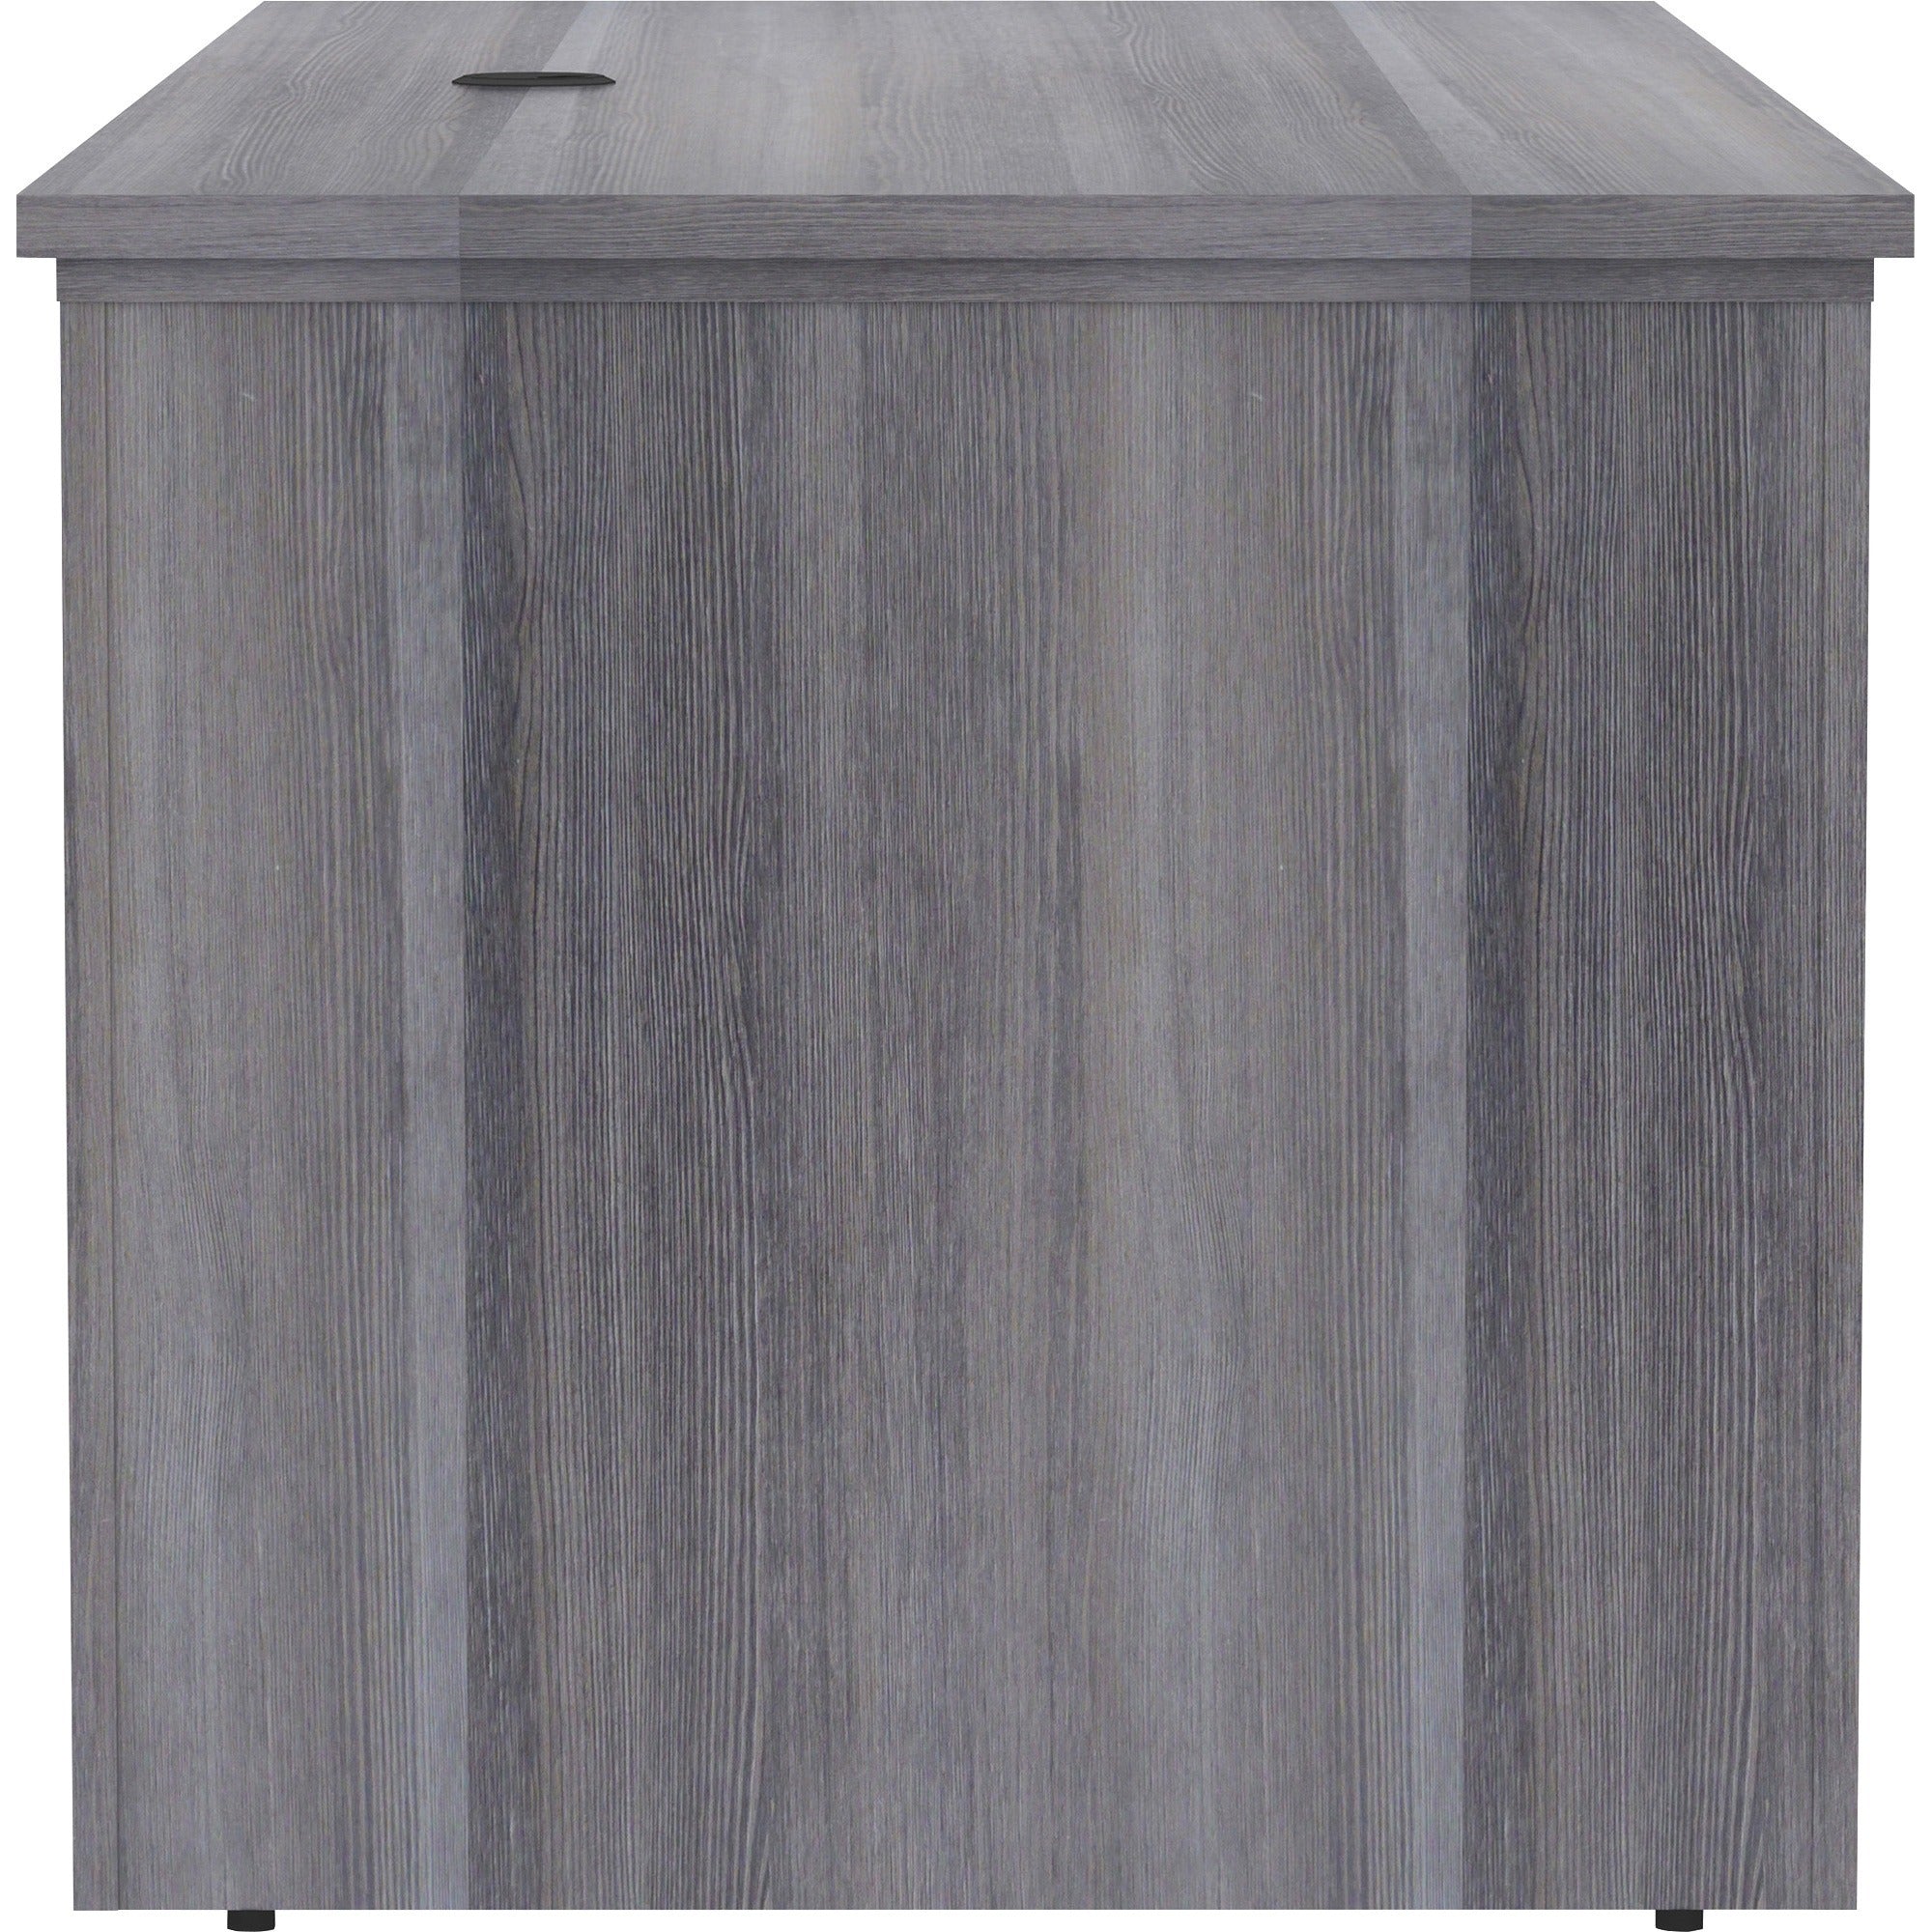 lorell-essentials-series-sit-to-stand-desk-shell-01-top-1-edge-72-x-2949-finish-weathered-charcoal-laminate-table-top_llr69578 - 3